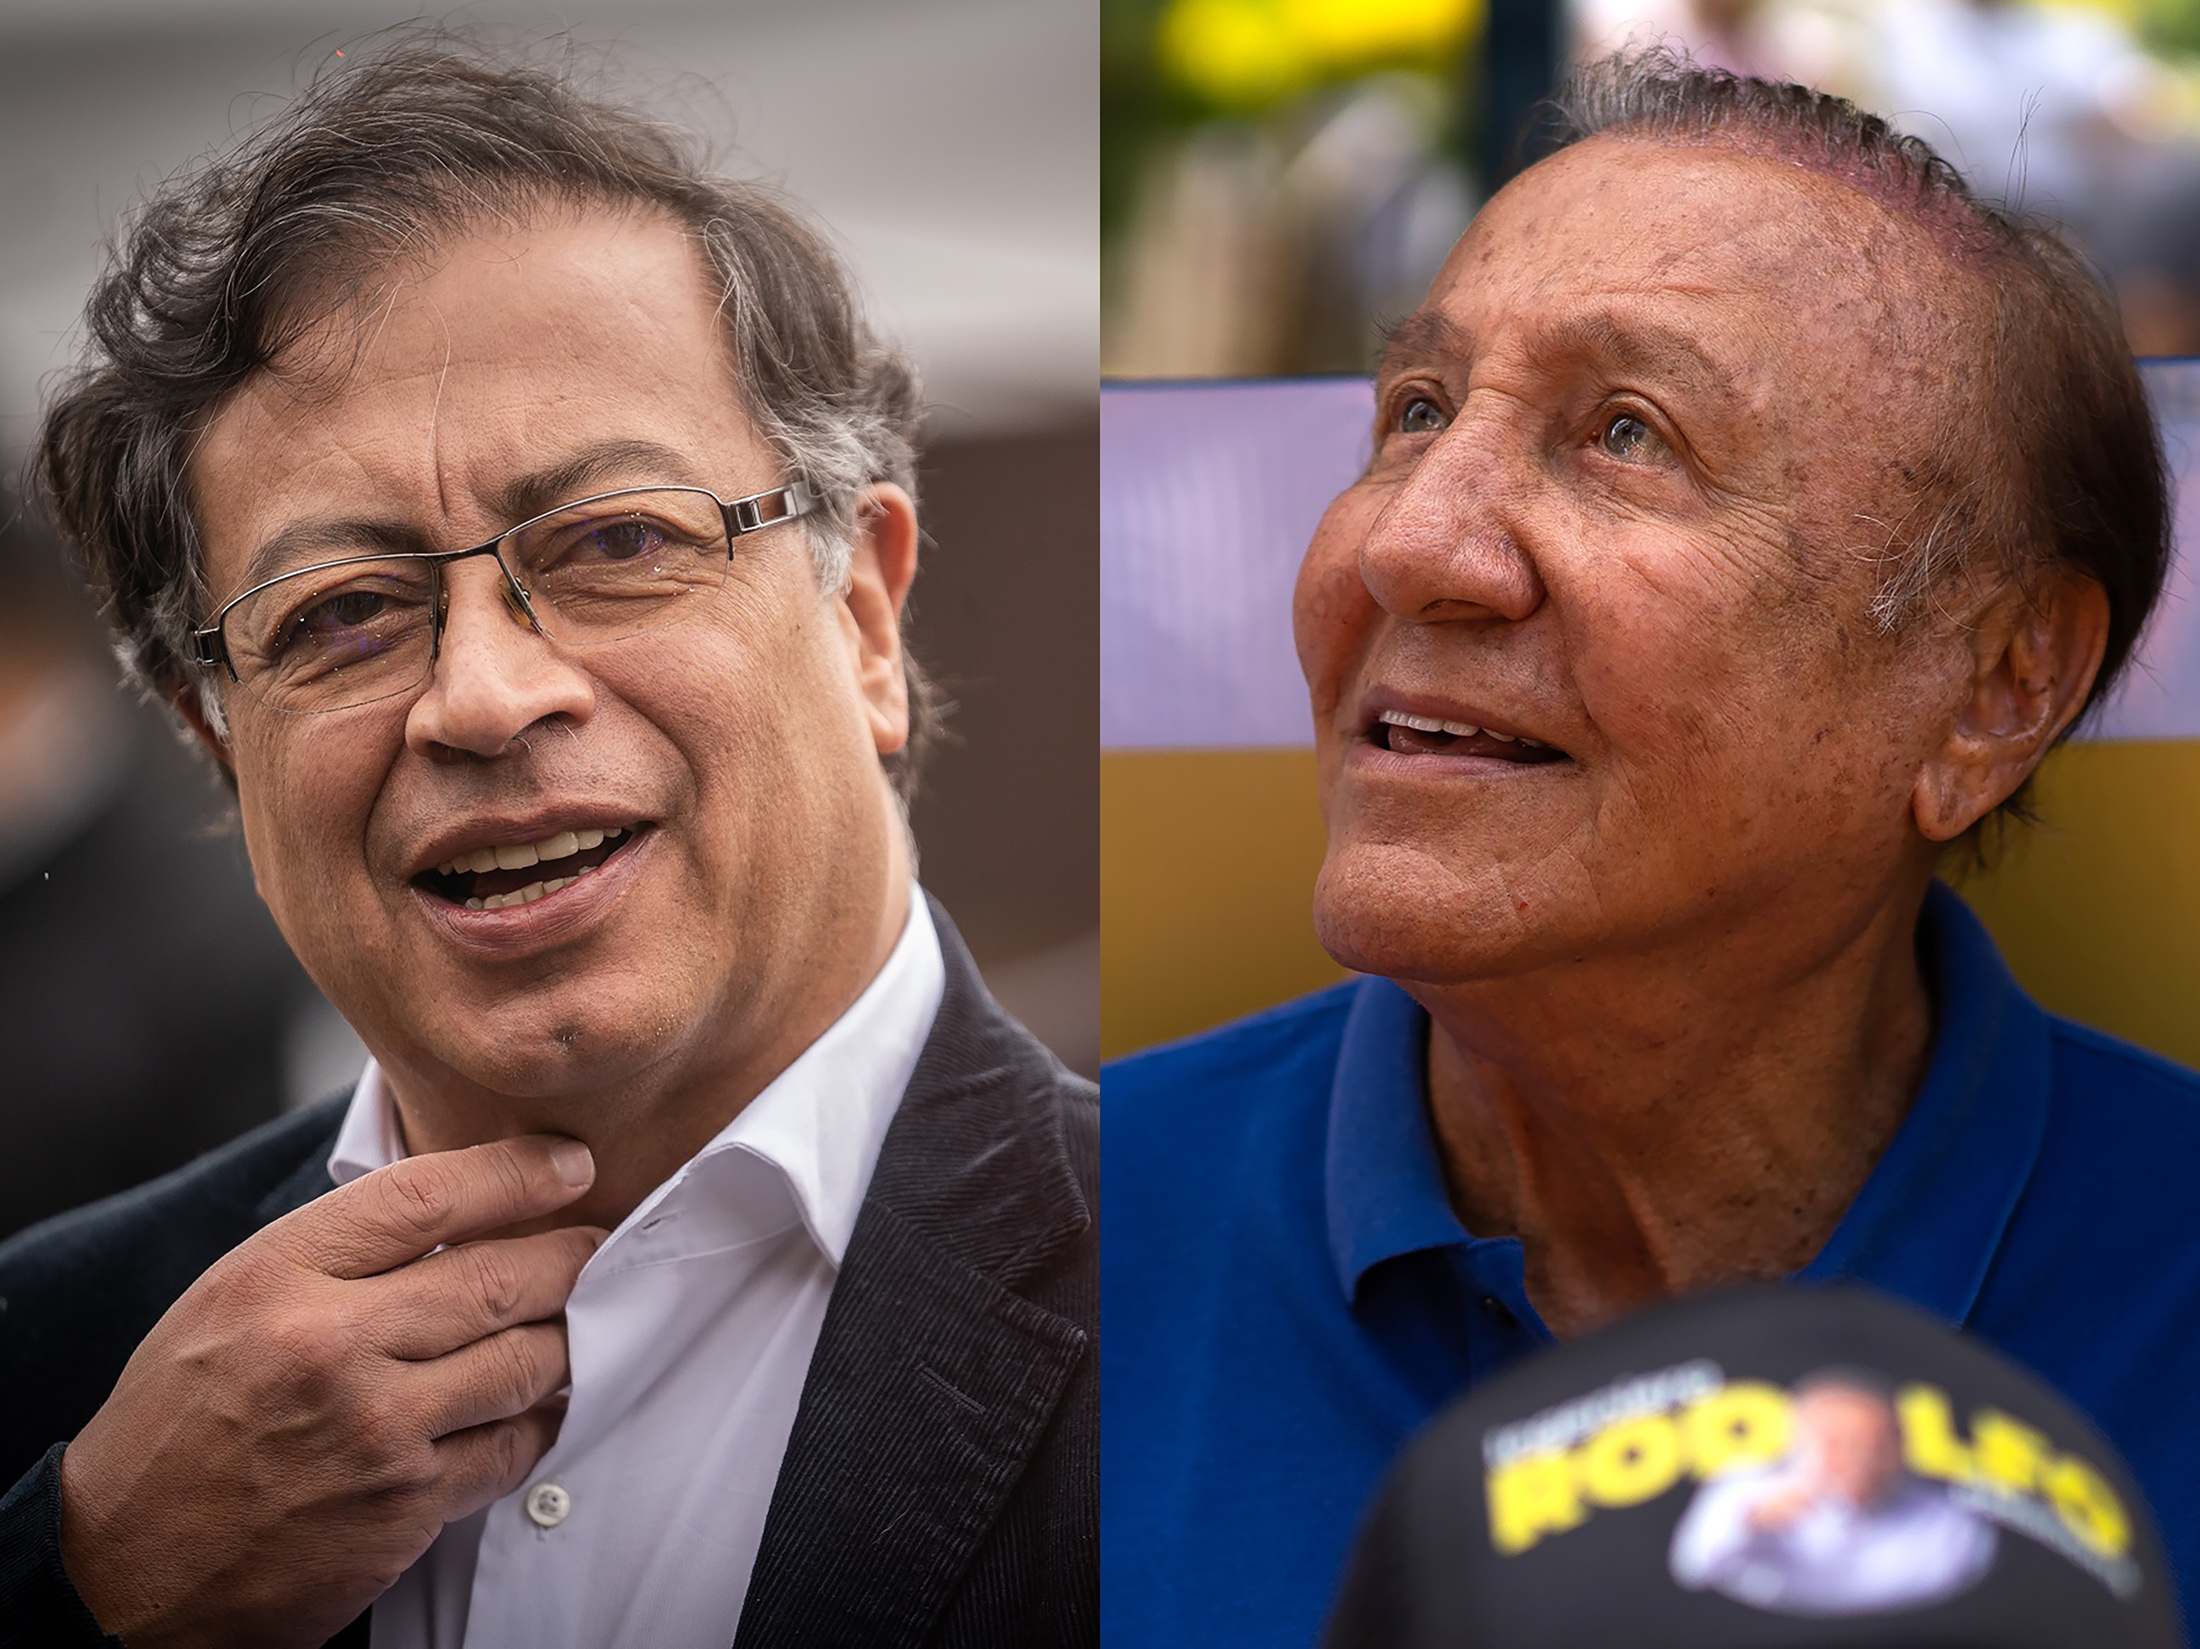 Gustavo Petro and Rodolfo Hernandez are facing off in Colombia’s runoff presidential election.